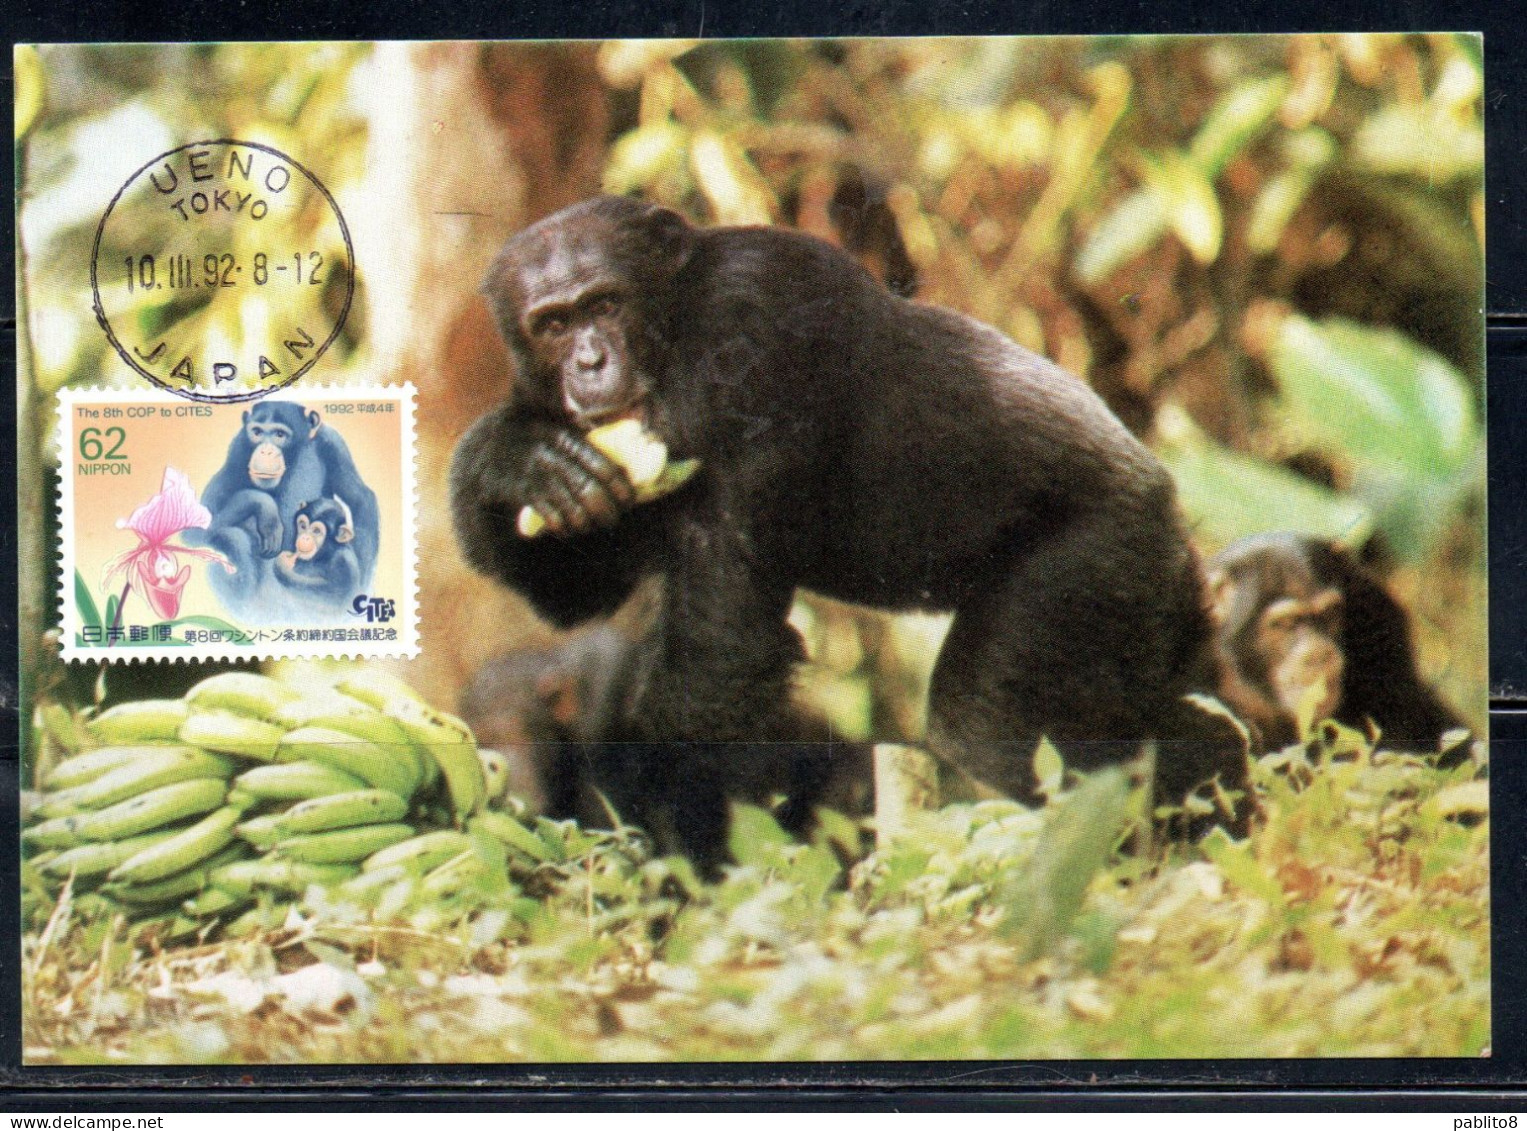 JAPAN GIAPPONE 1992 CONFERENCE ON INTERNATIONAL TRADE IN ENDANGERED SPECIES CITES CHIMPANZEES 62y MAXI MAXIMUM CARD - Cartes-maximum